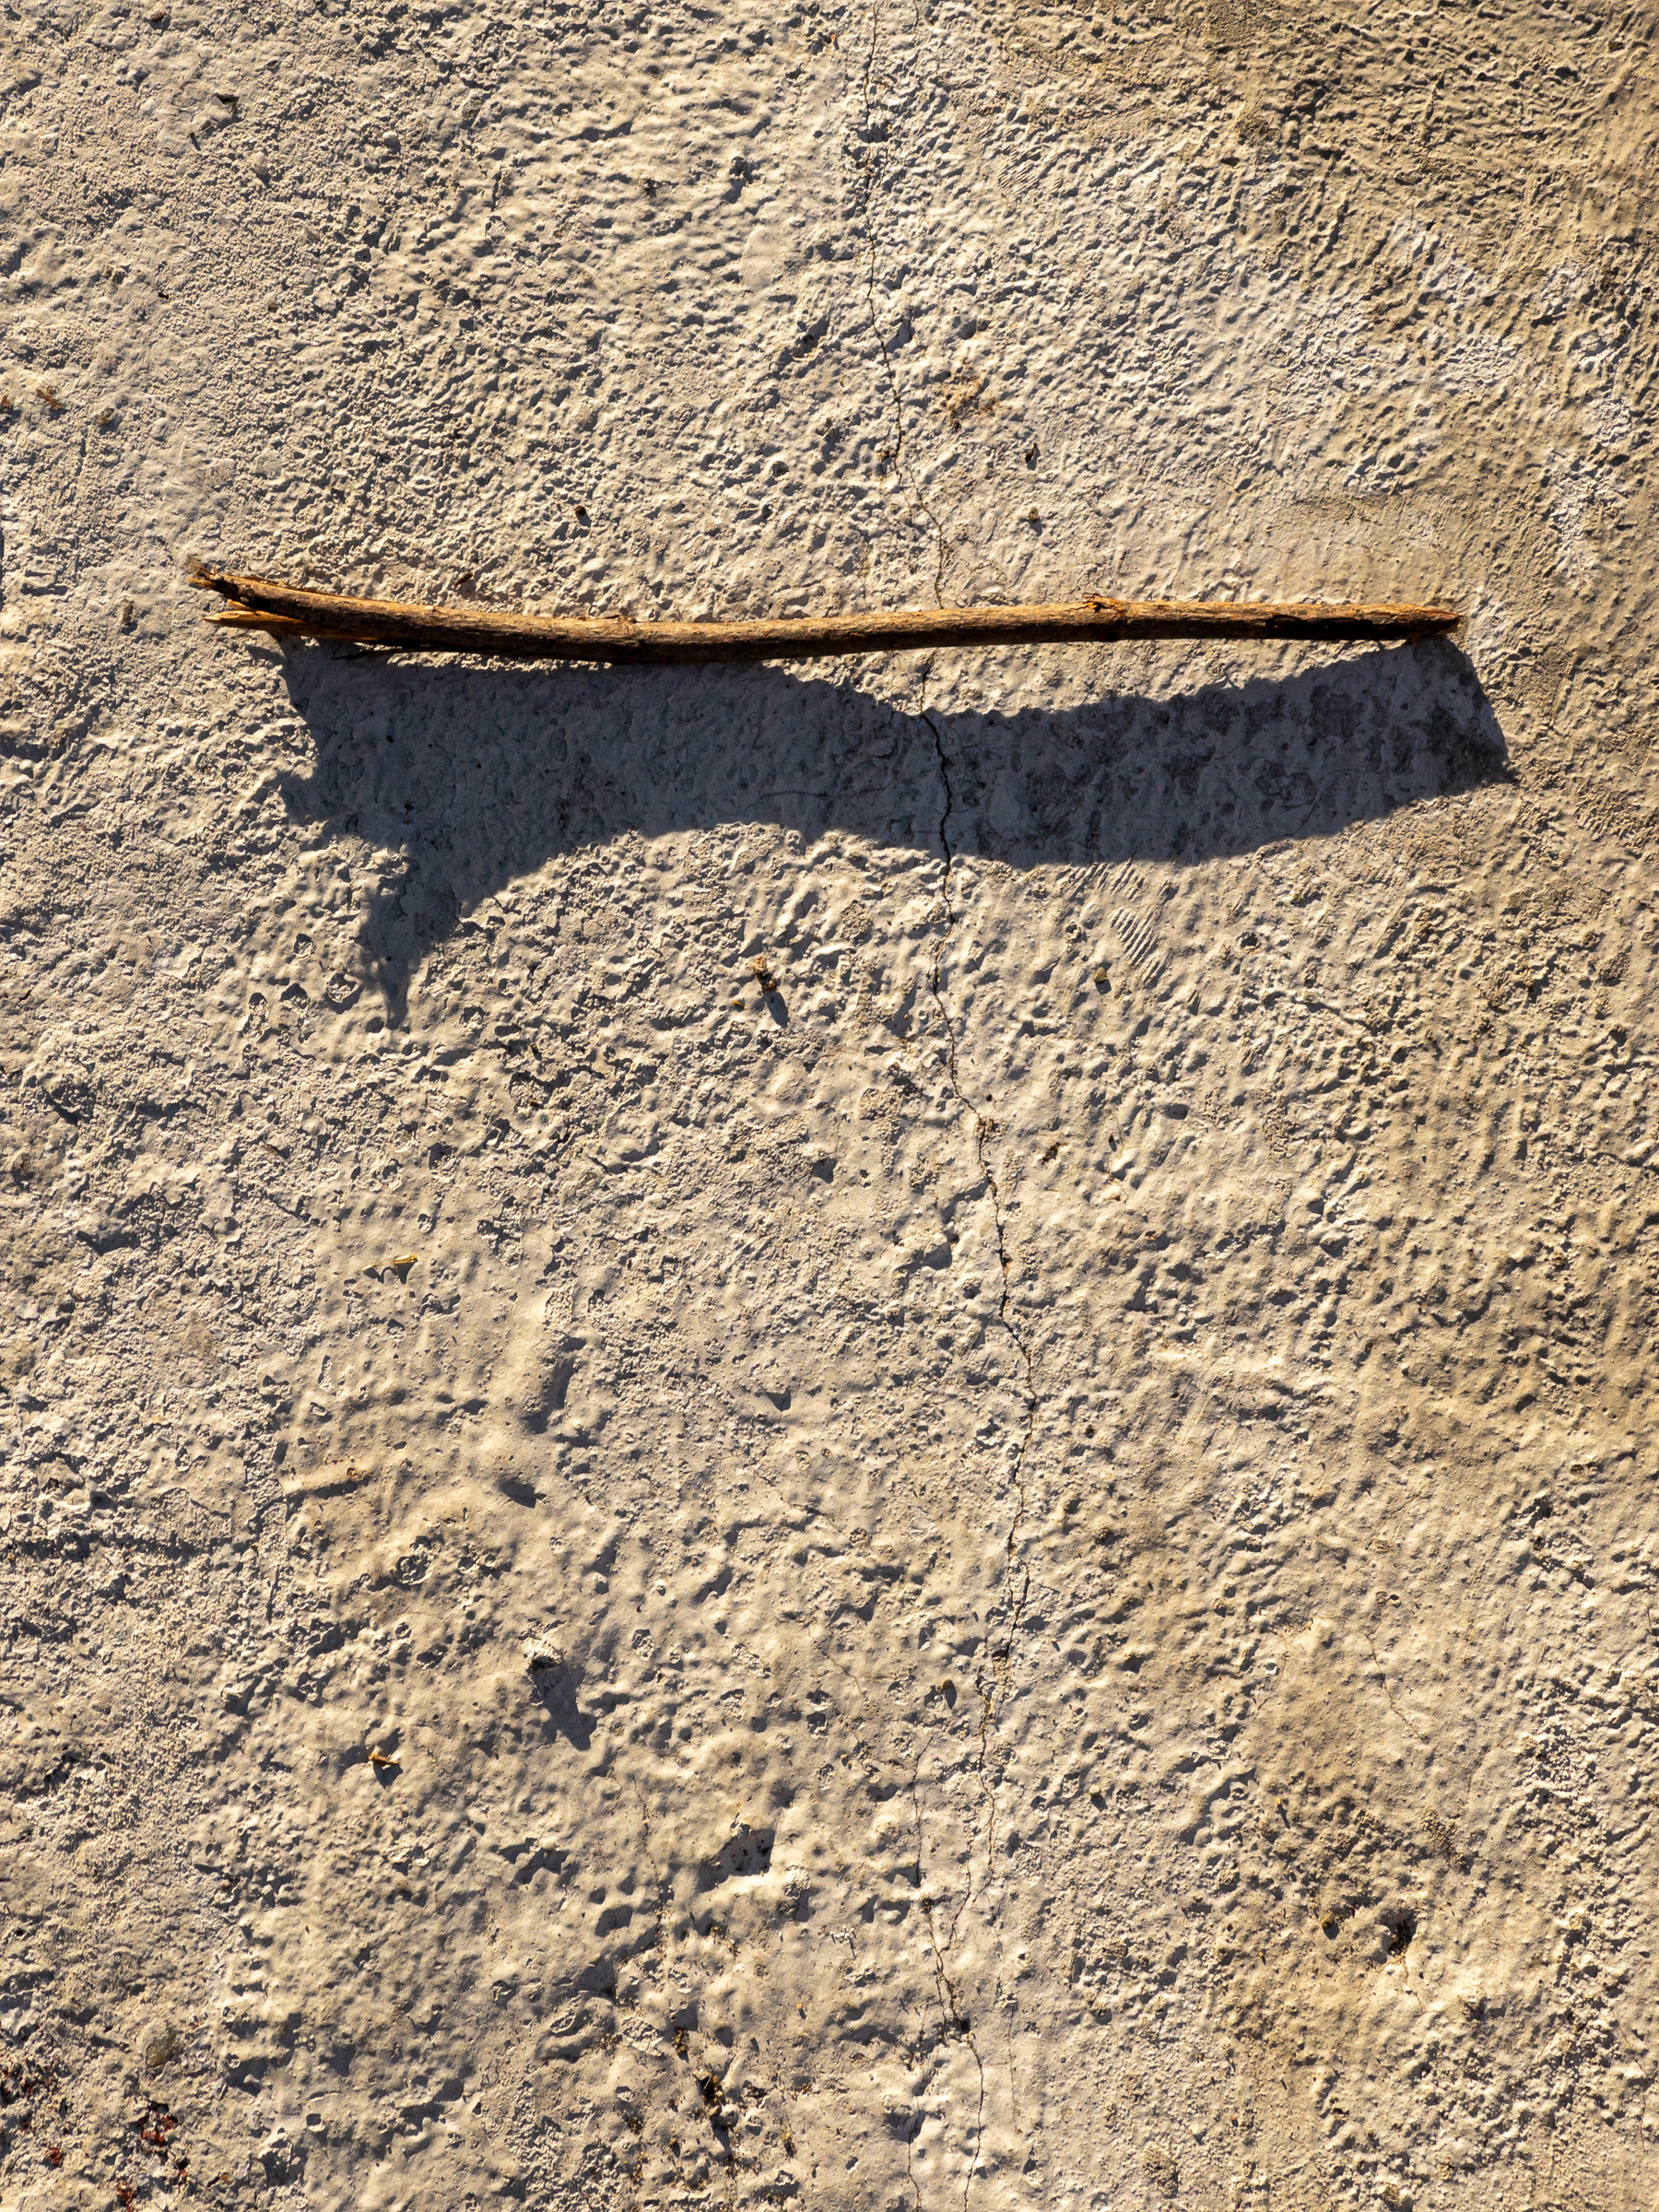 A stick with its shadow running horizontally across the upper third of the frame. Concrete pavement.